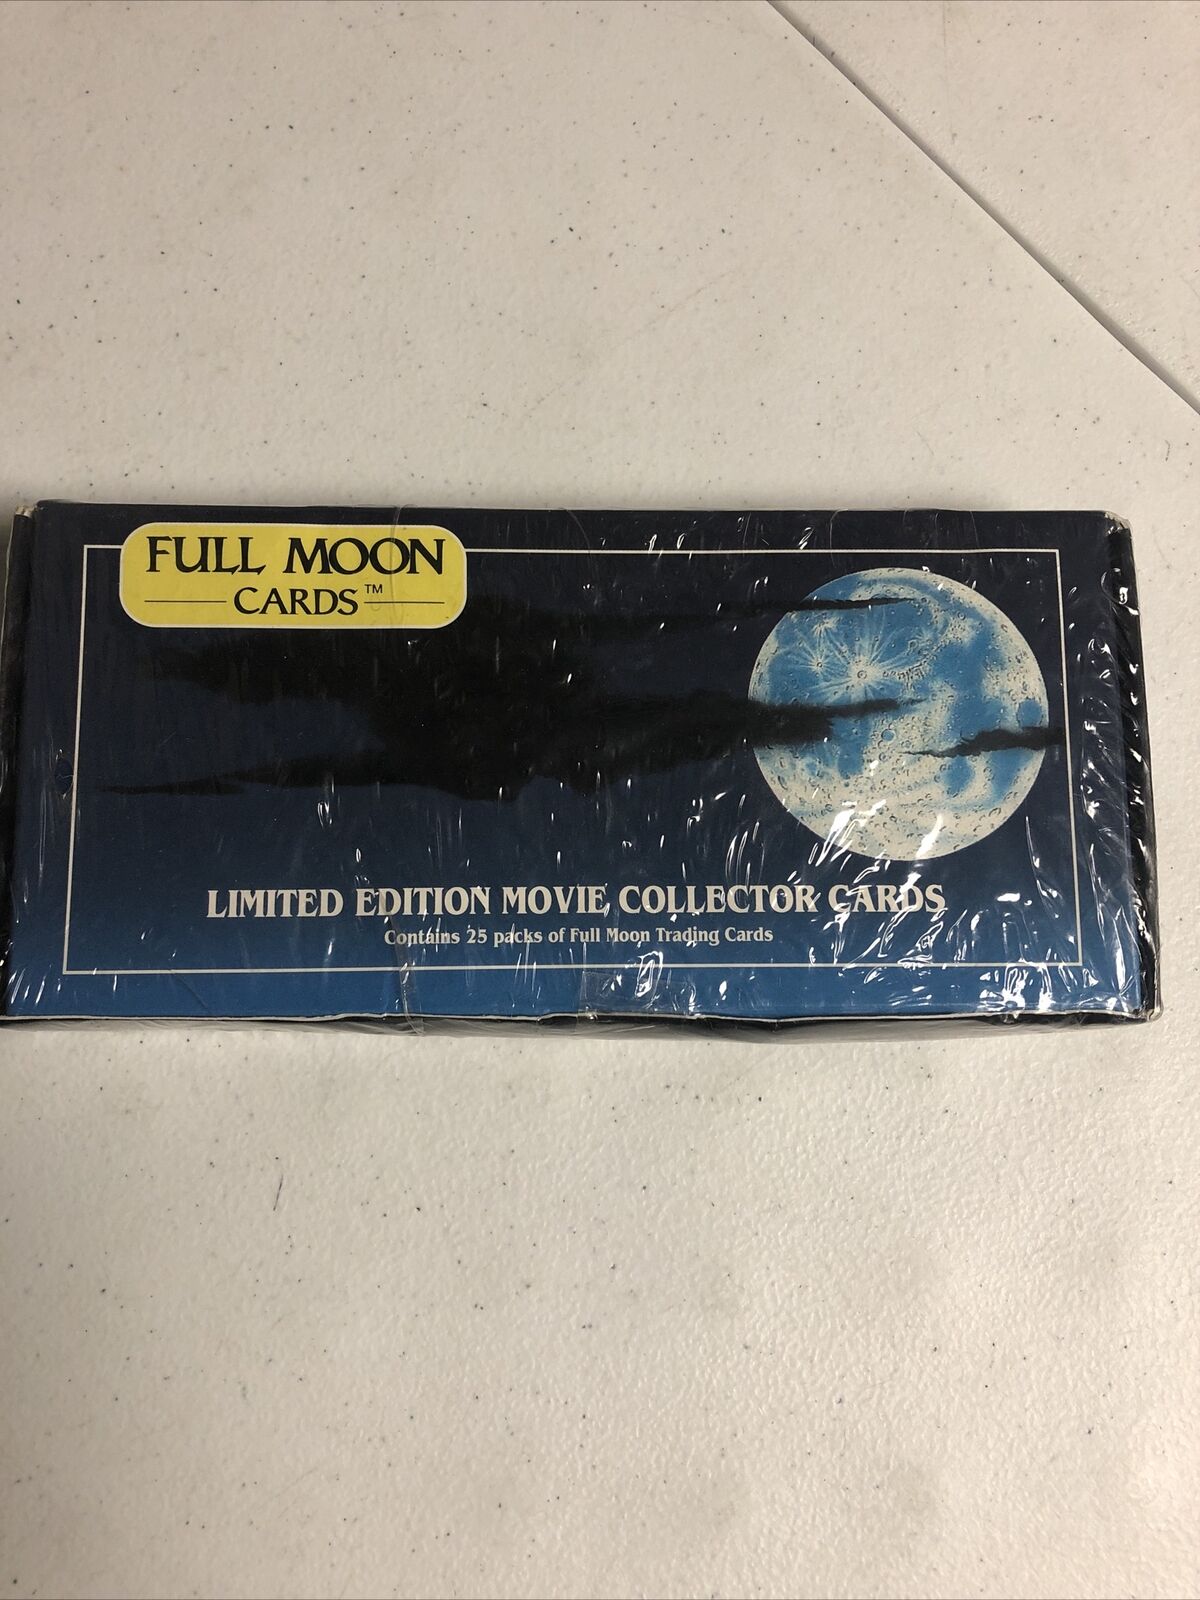 1 Rare 1991 Full Moon Limited Edition Movie Collector Cards Box of 25 Sealed Pks